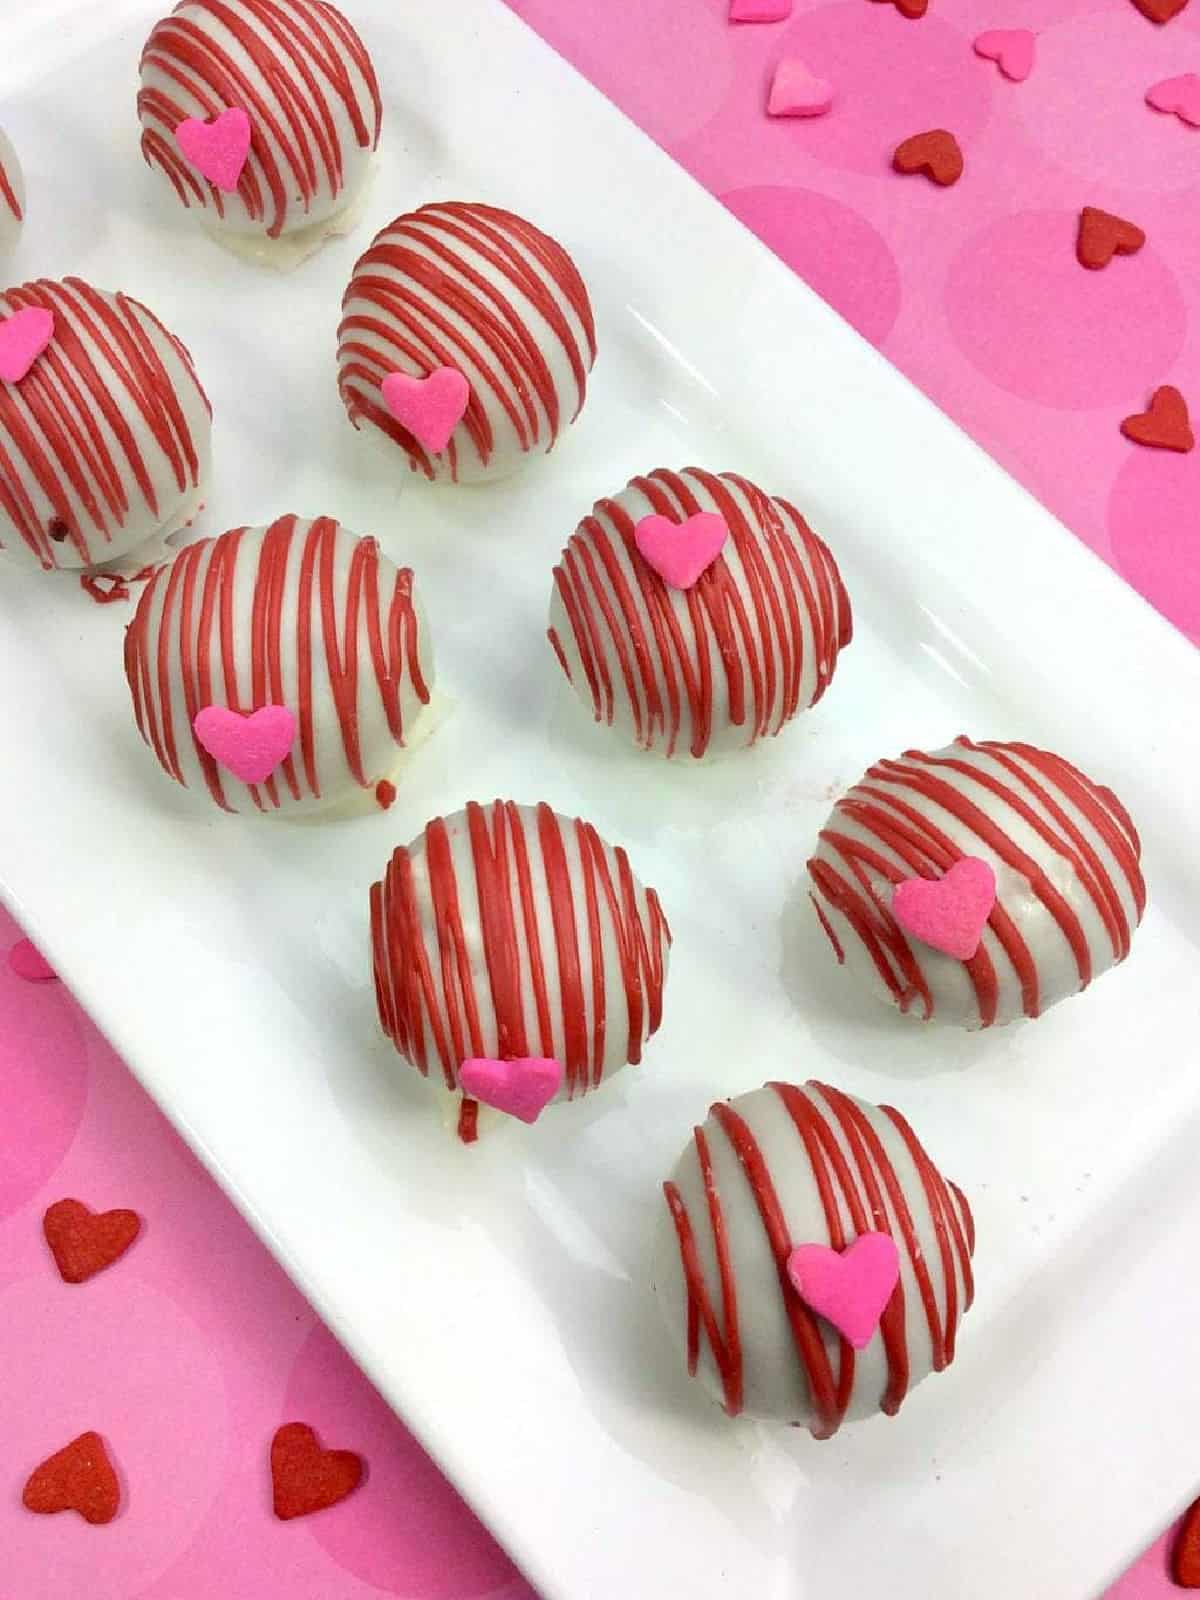 White chocolate covered cake balls with pink chocolate drizzle and candy heart sprinkles.